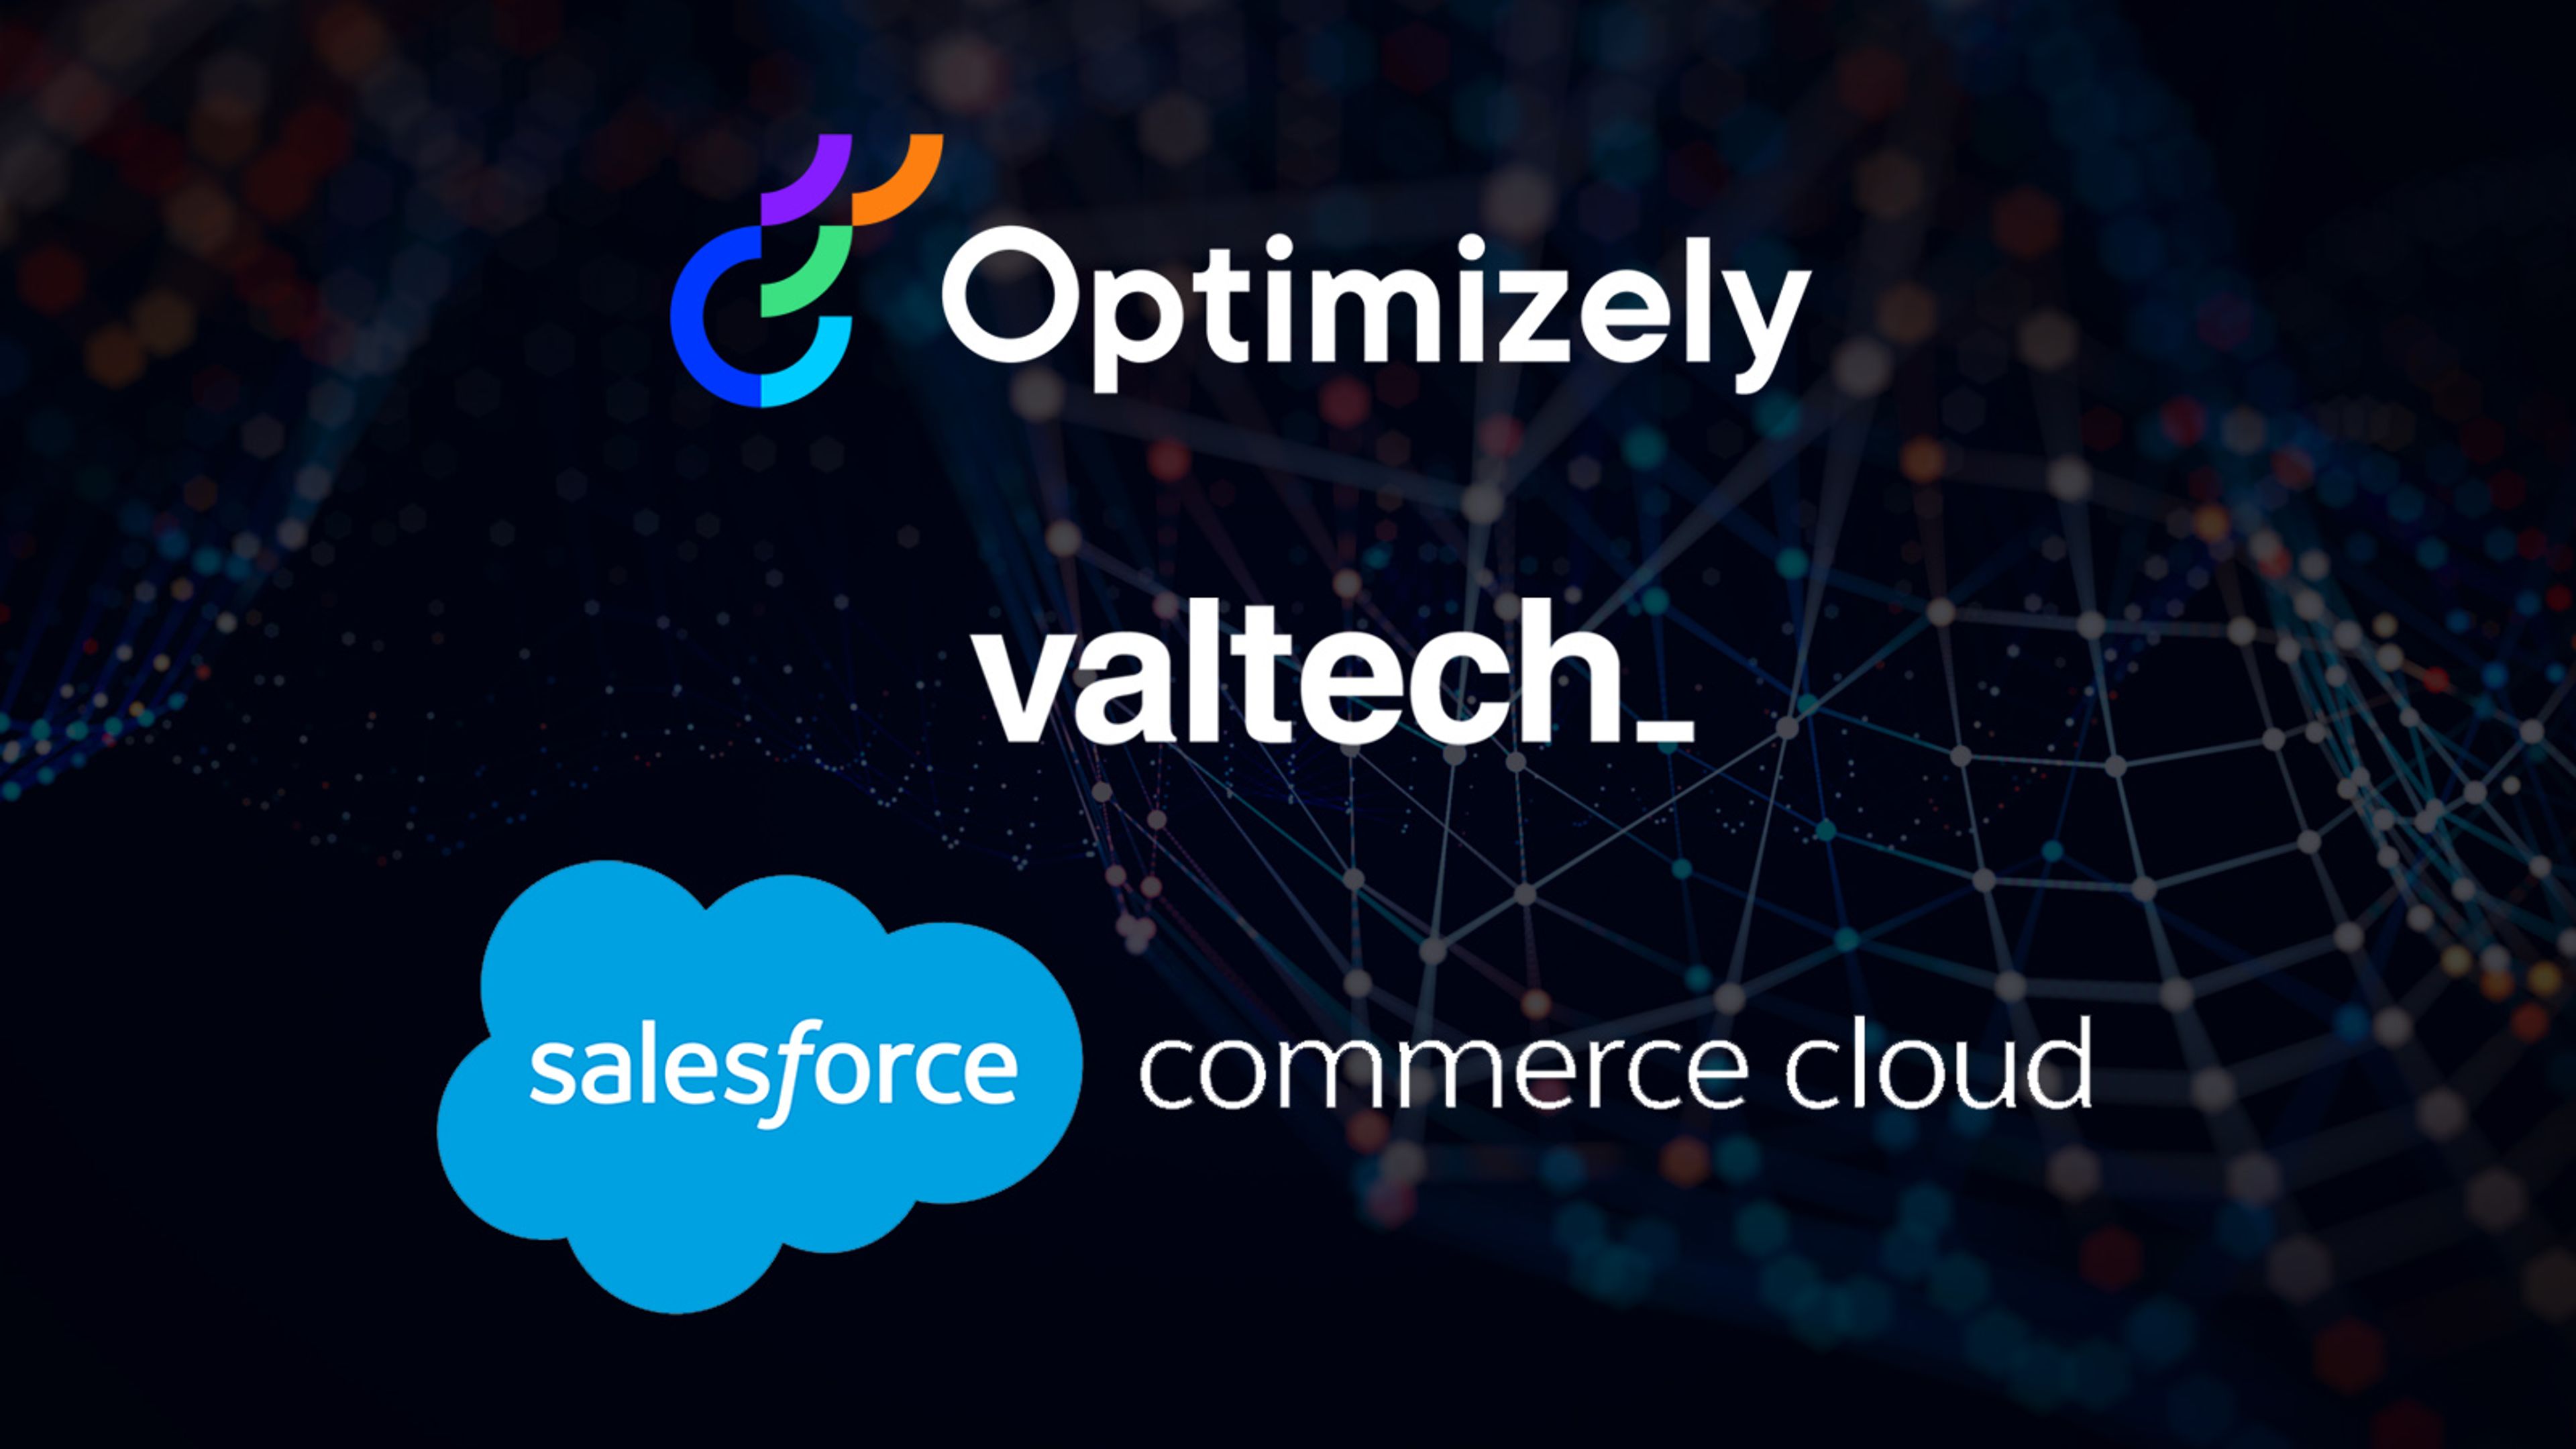 Optimizely, Valtech, and Salesforce Commerce Cloud logos